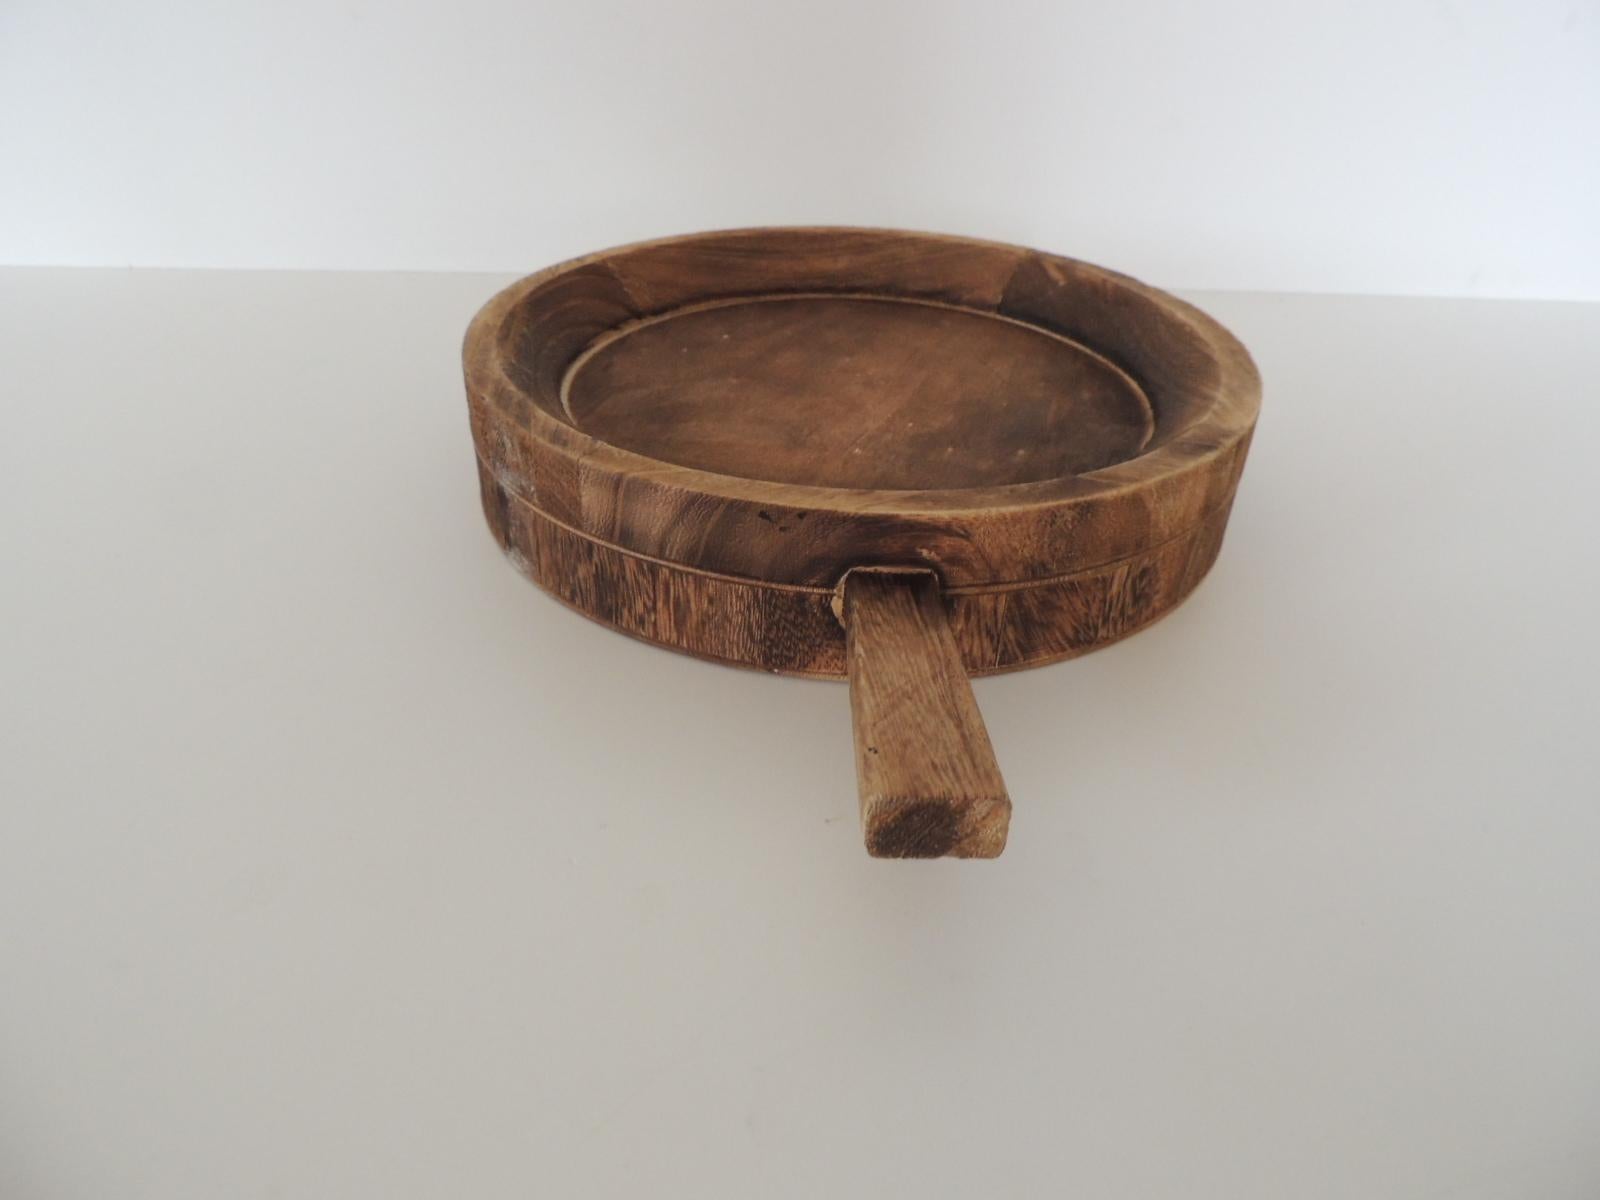 Rustic Round Wooden Artisanal Bowl with Handle